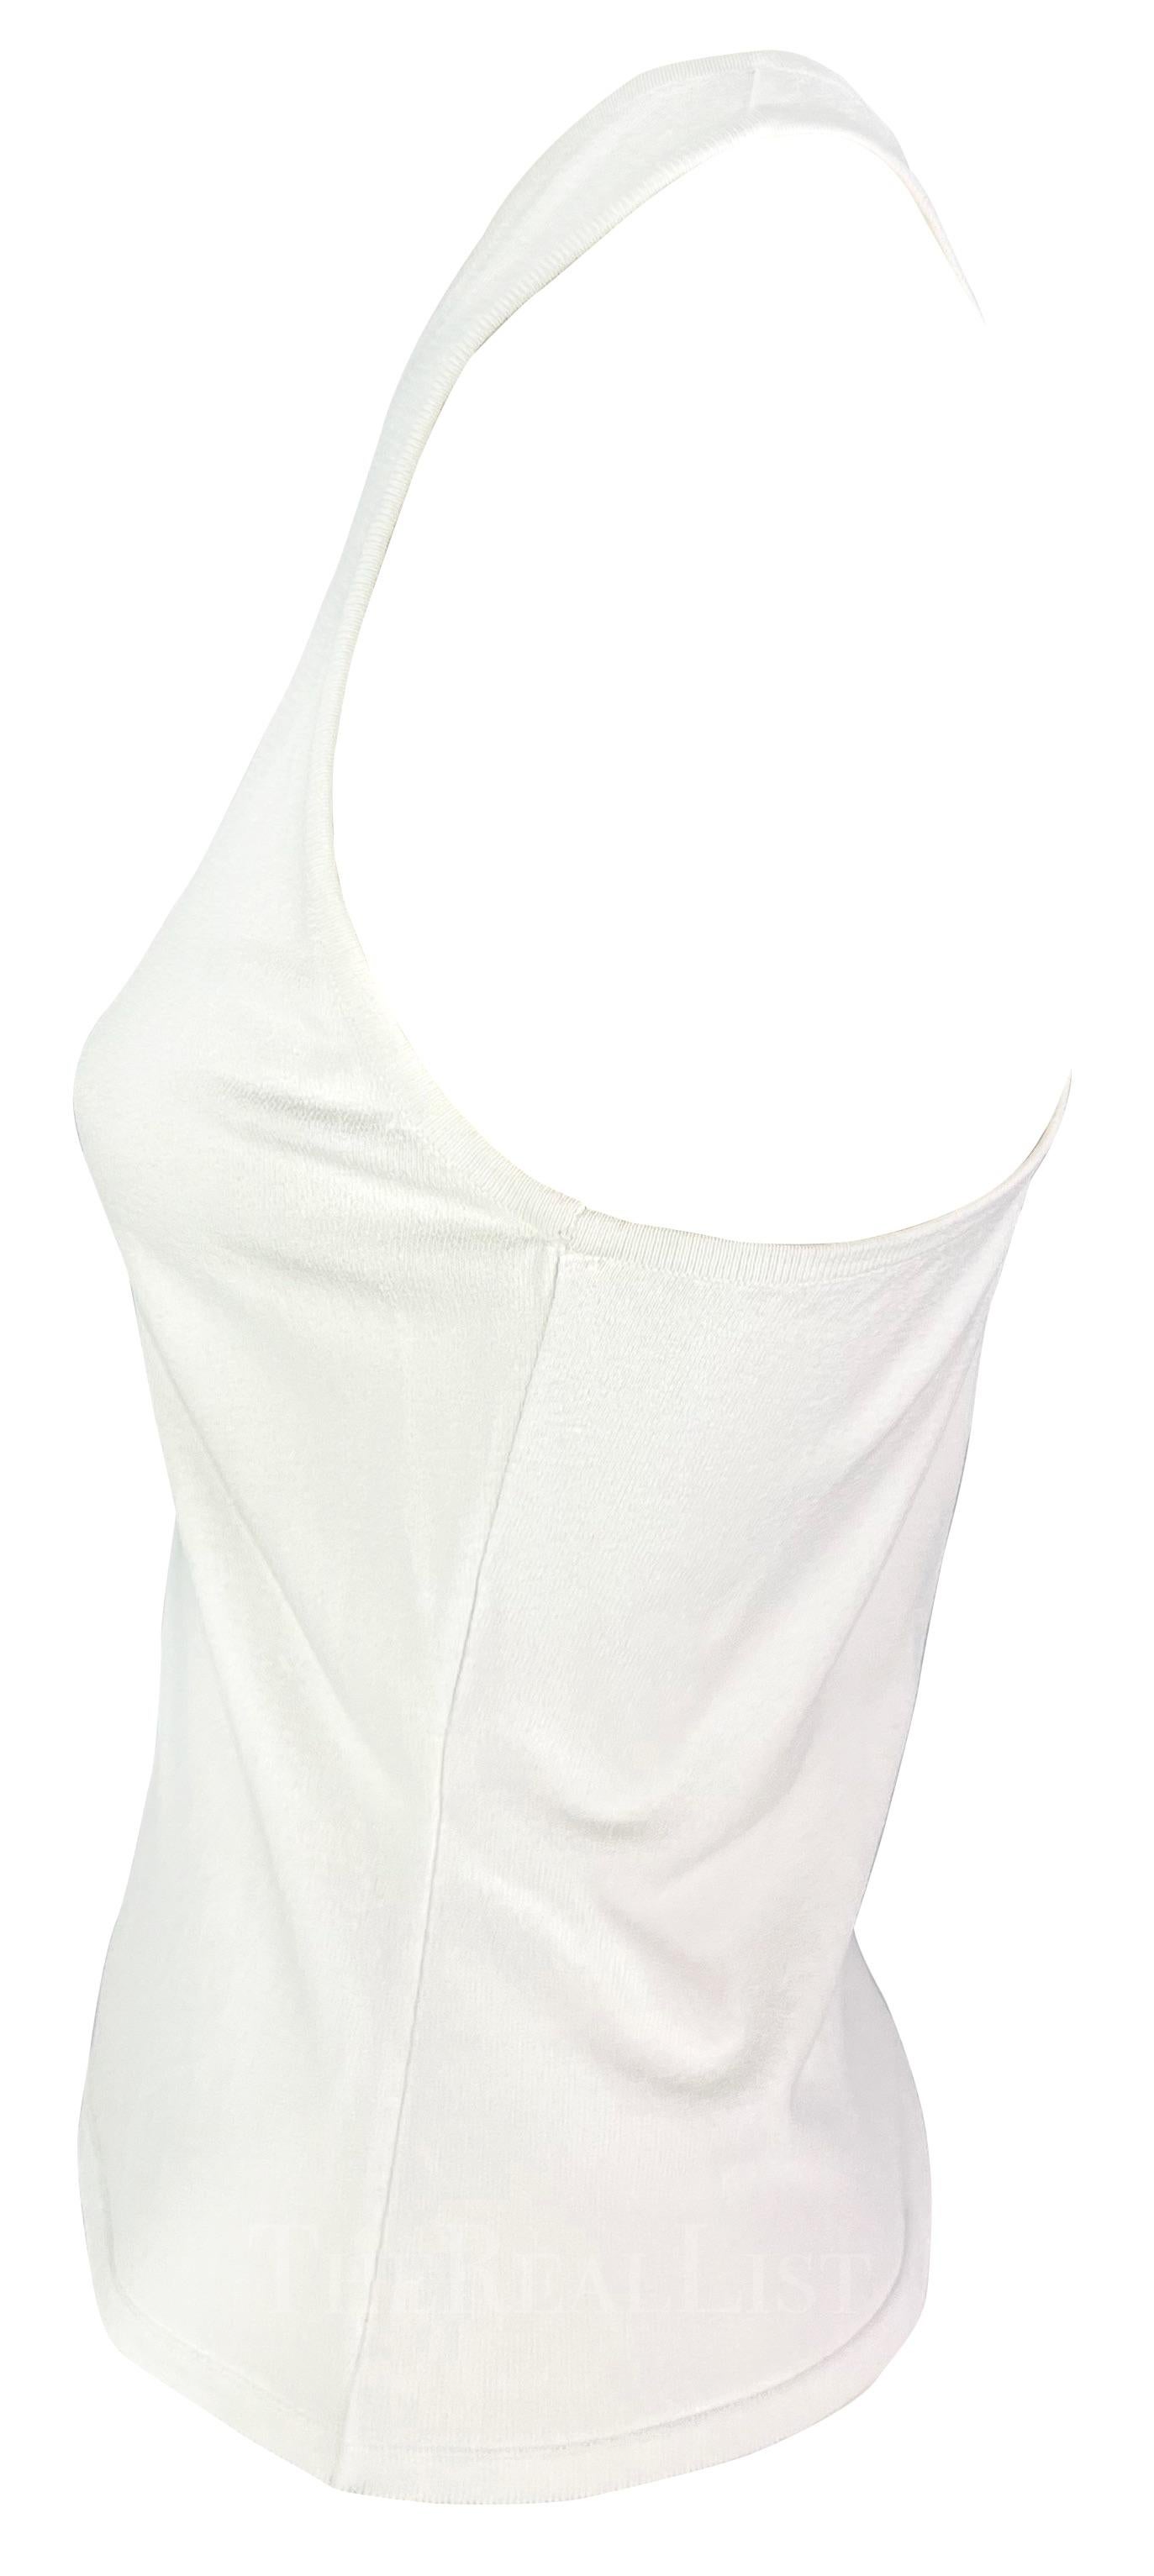 S/S 1998 Gucci by Tom Ford White Stretch Knit Racerback Tank Top For Sale 3